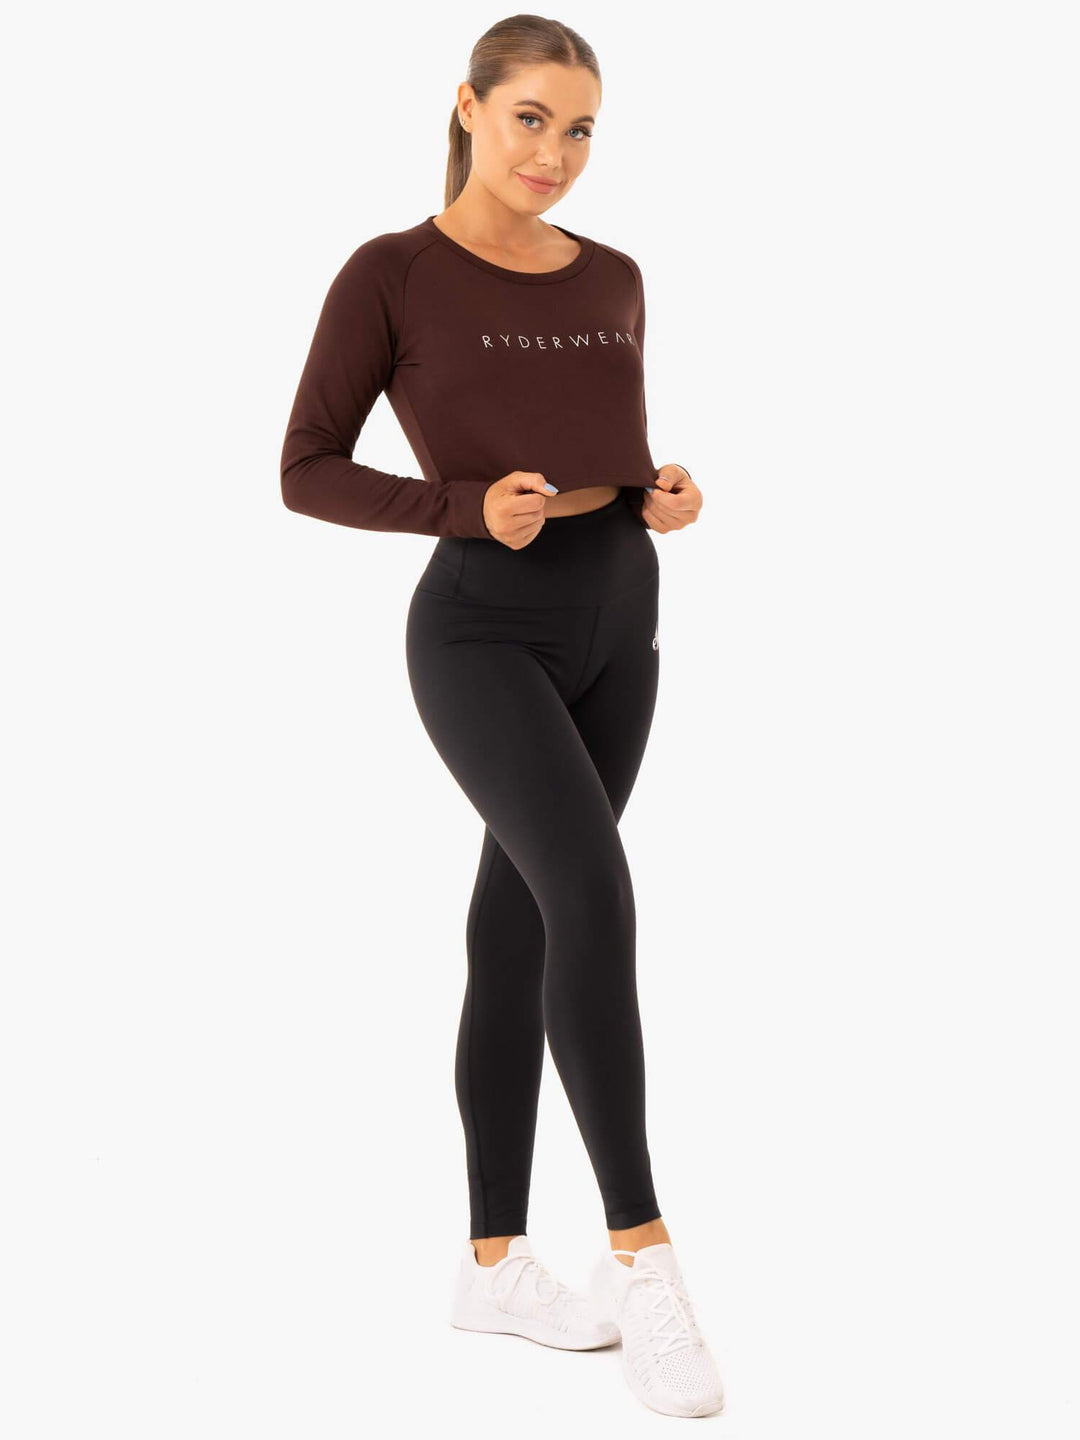 Staples Cropped Sweater - Chocolate Clothing Ryderwear 